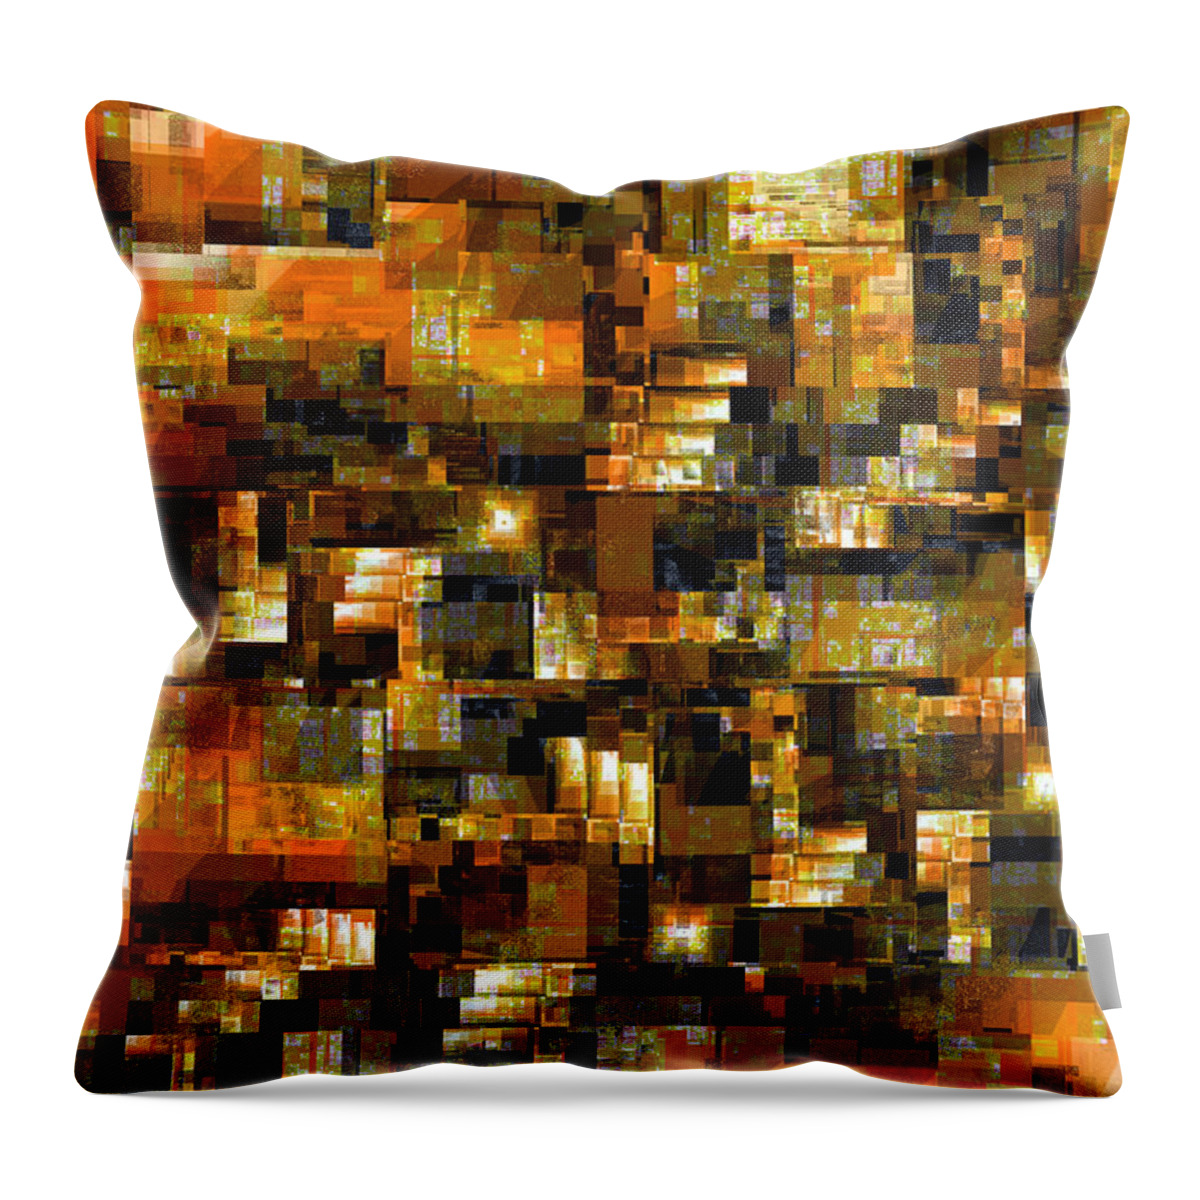 Fractal Throw Pillow featuring the digital art Dwellings by Richard Ortolano